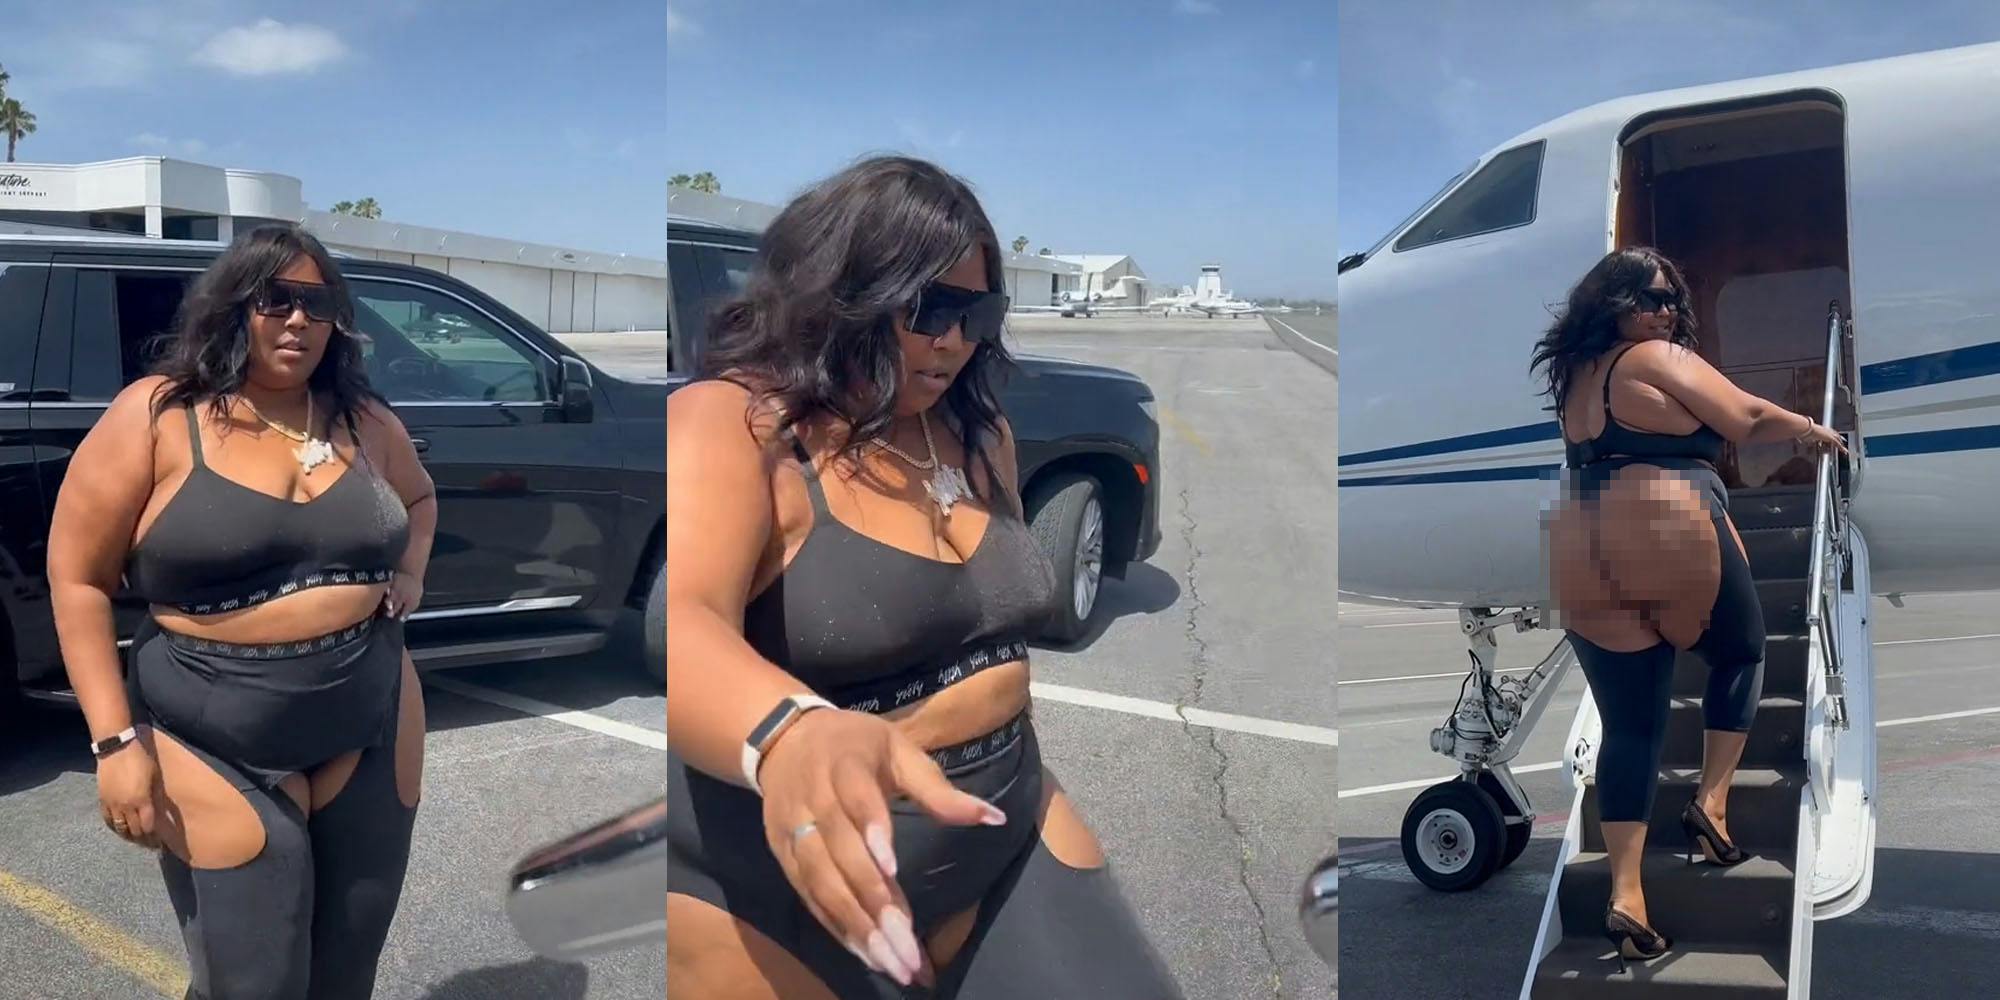 Person who tried to call out Lizzo for airplane attire shut down